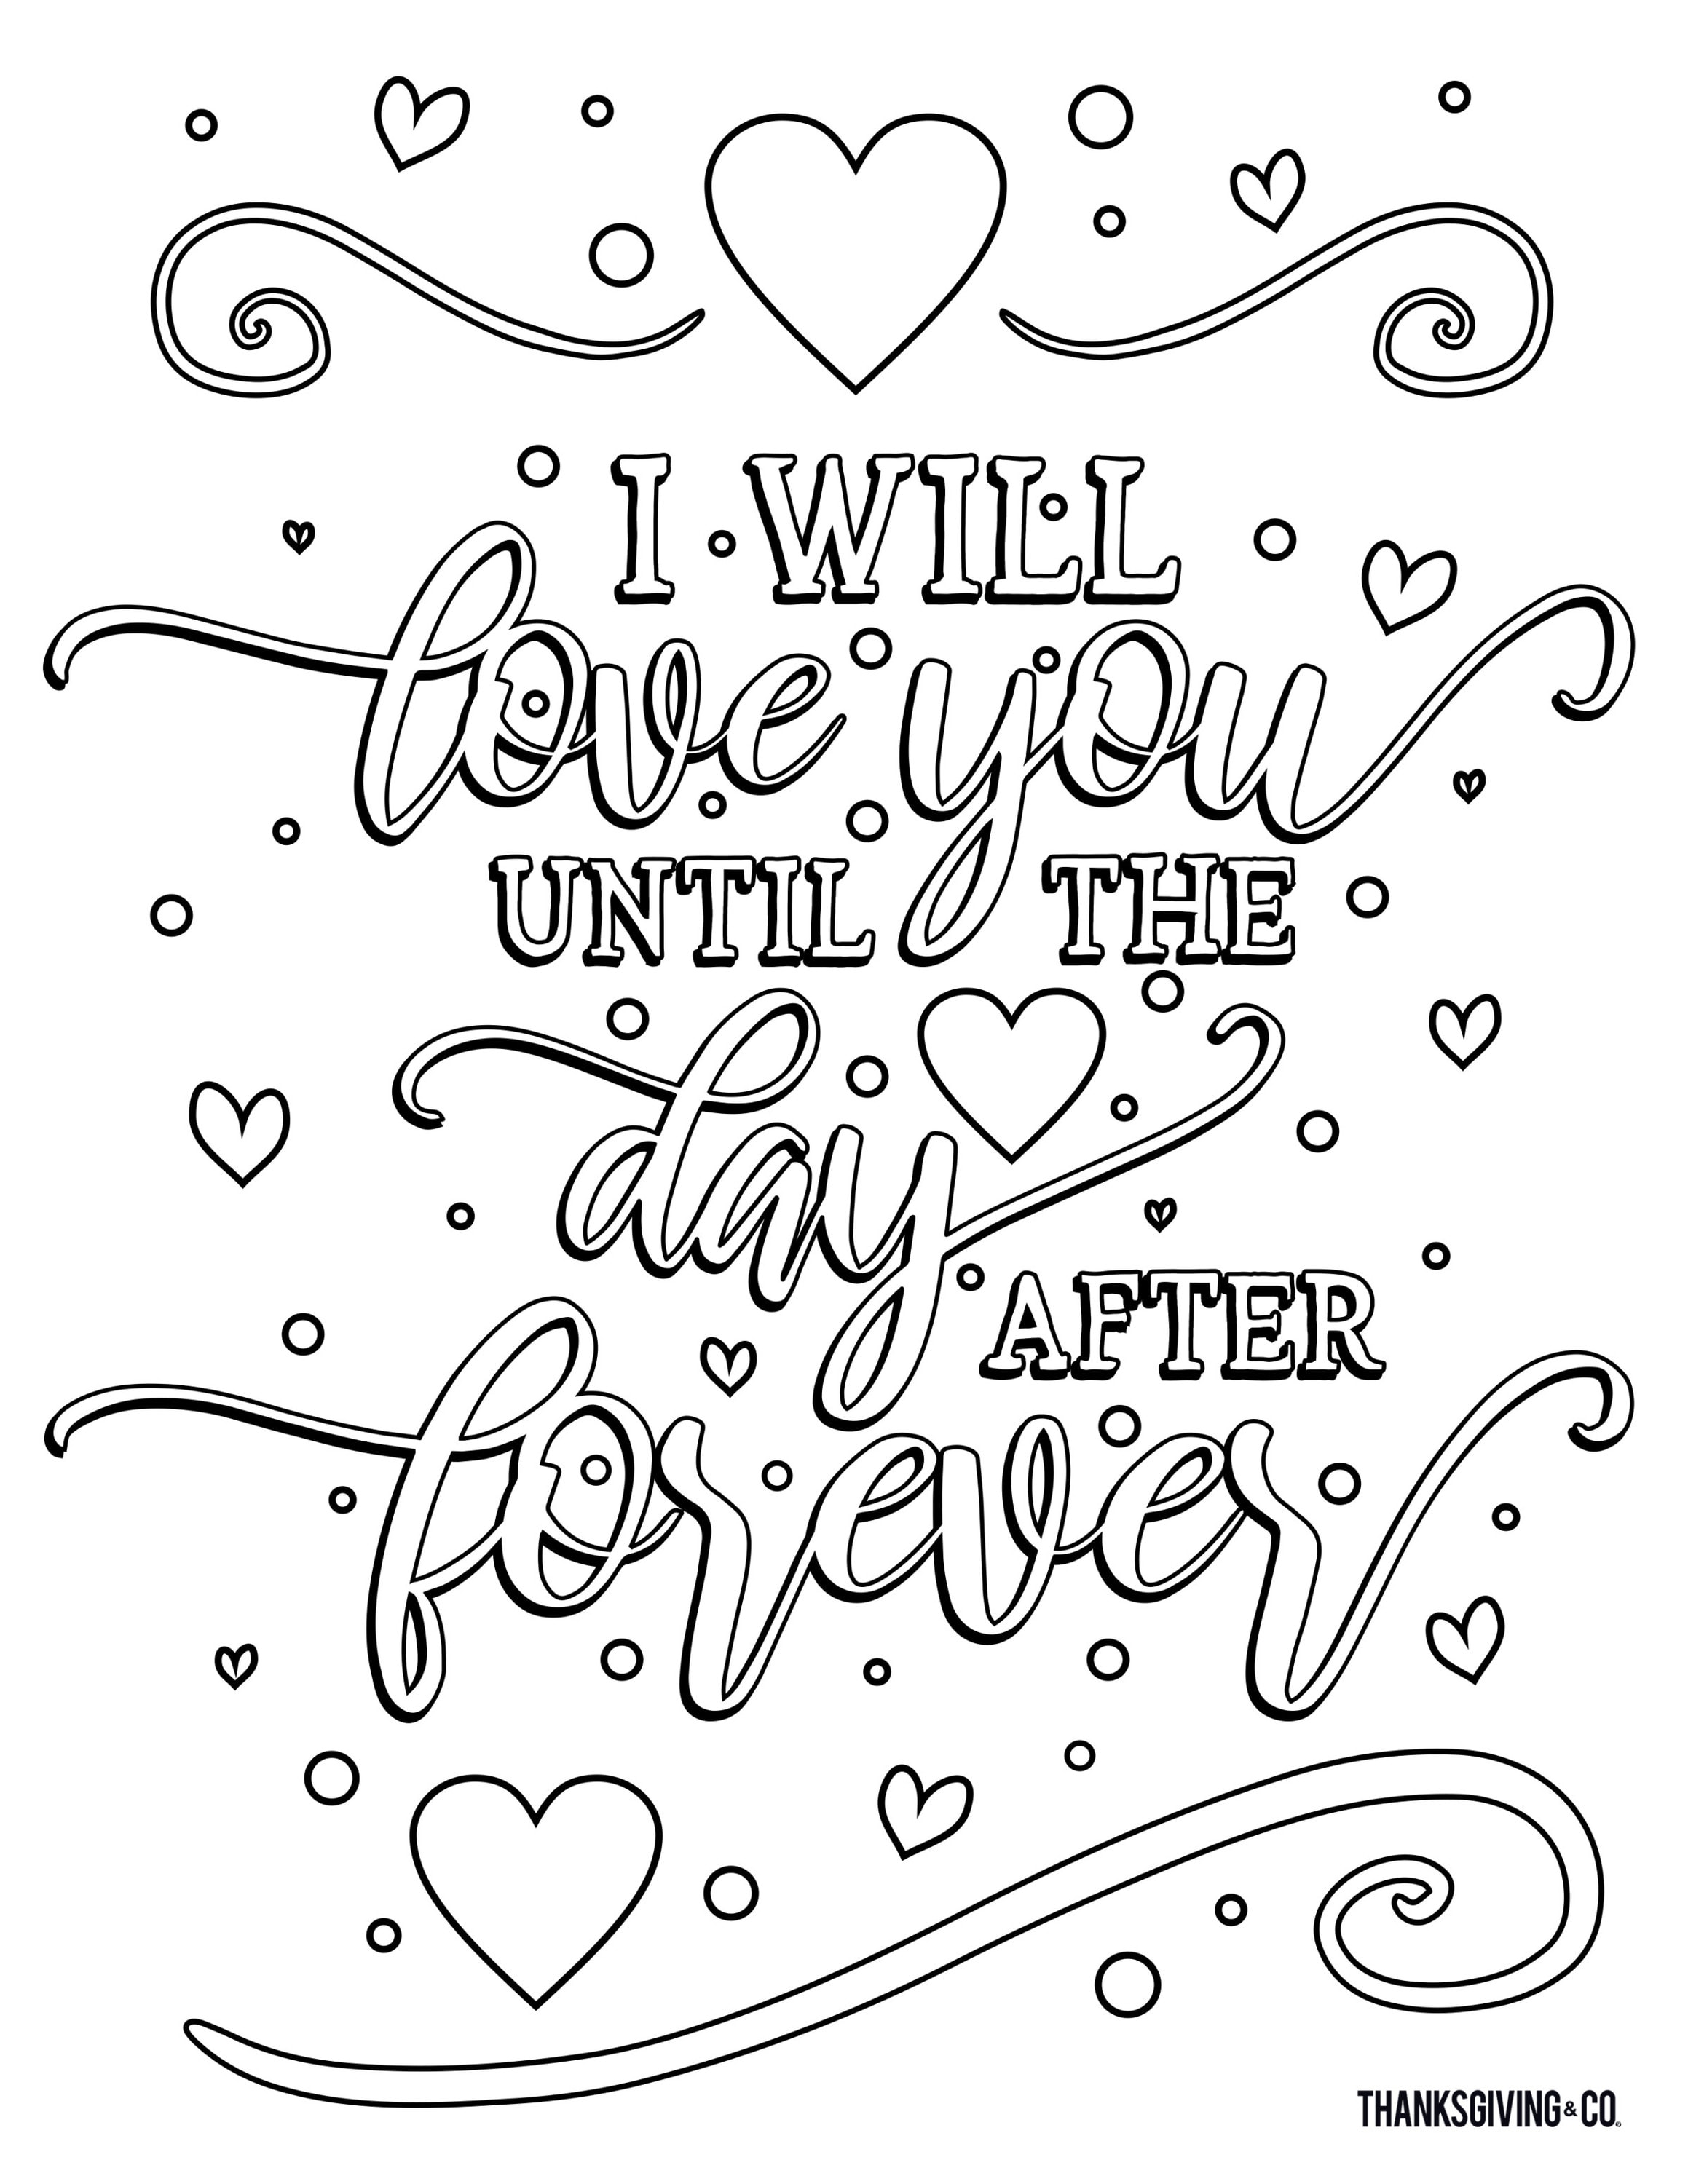 4 free adult coloring pages for Valentine's Day that will bring out